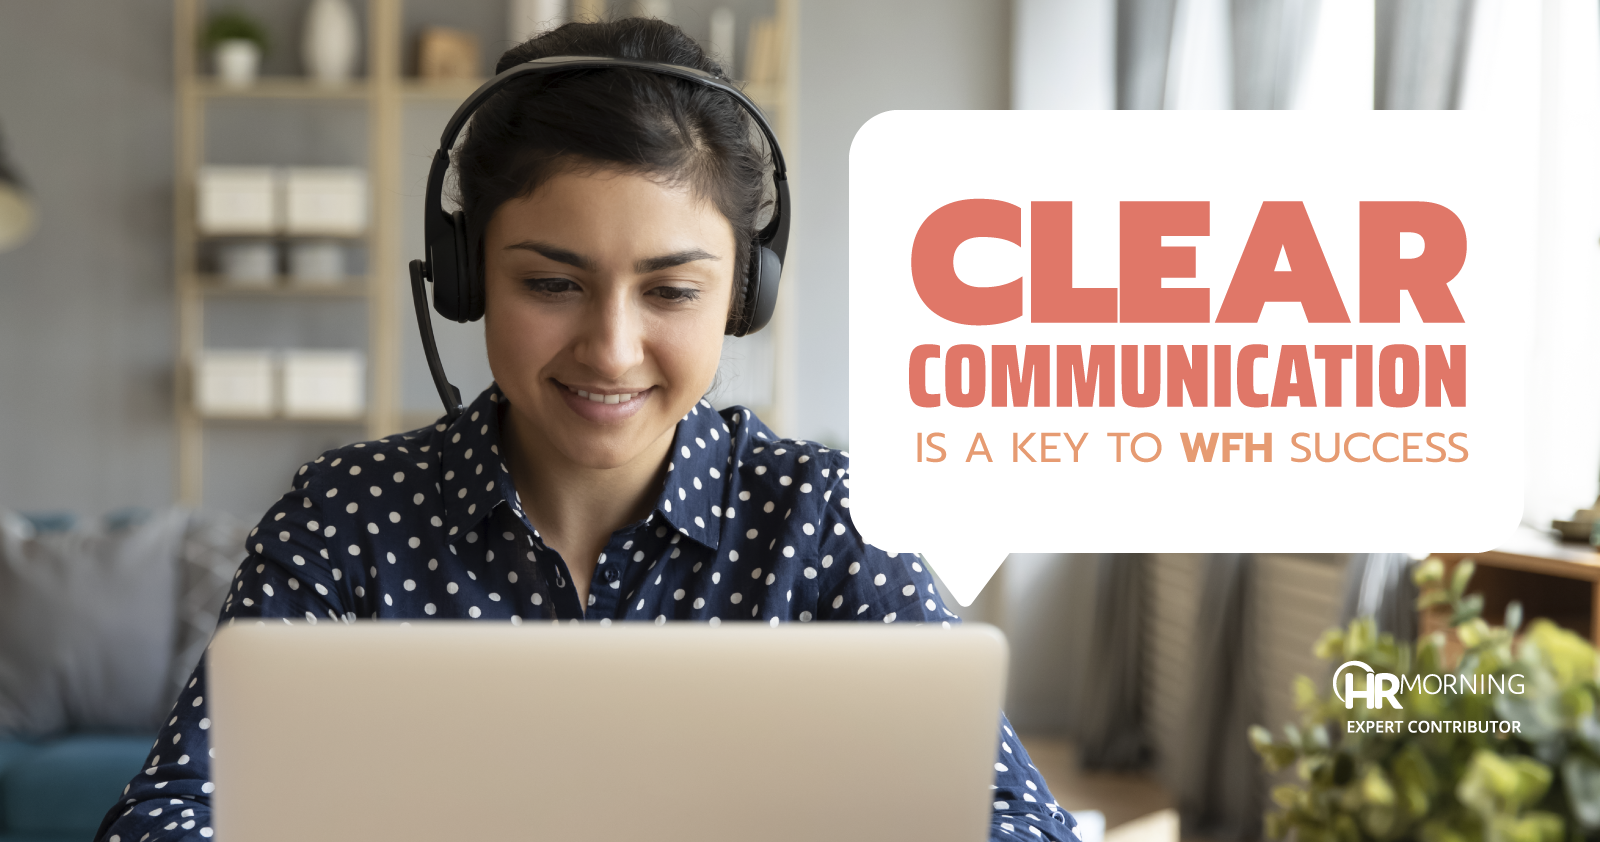 Clear communication is a key to WFH success